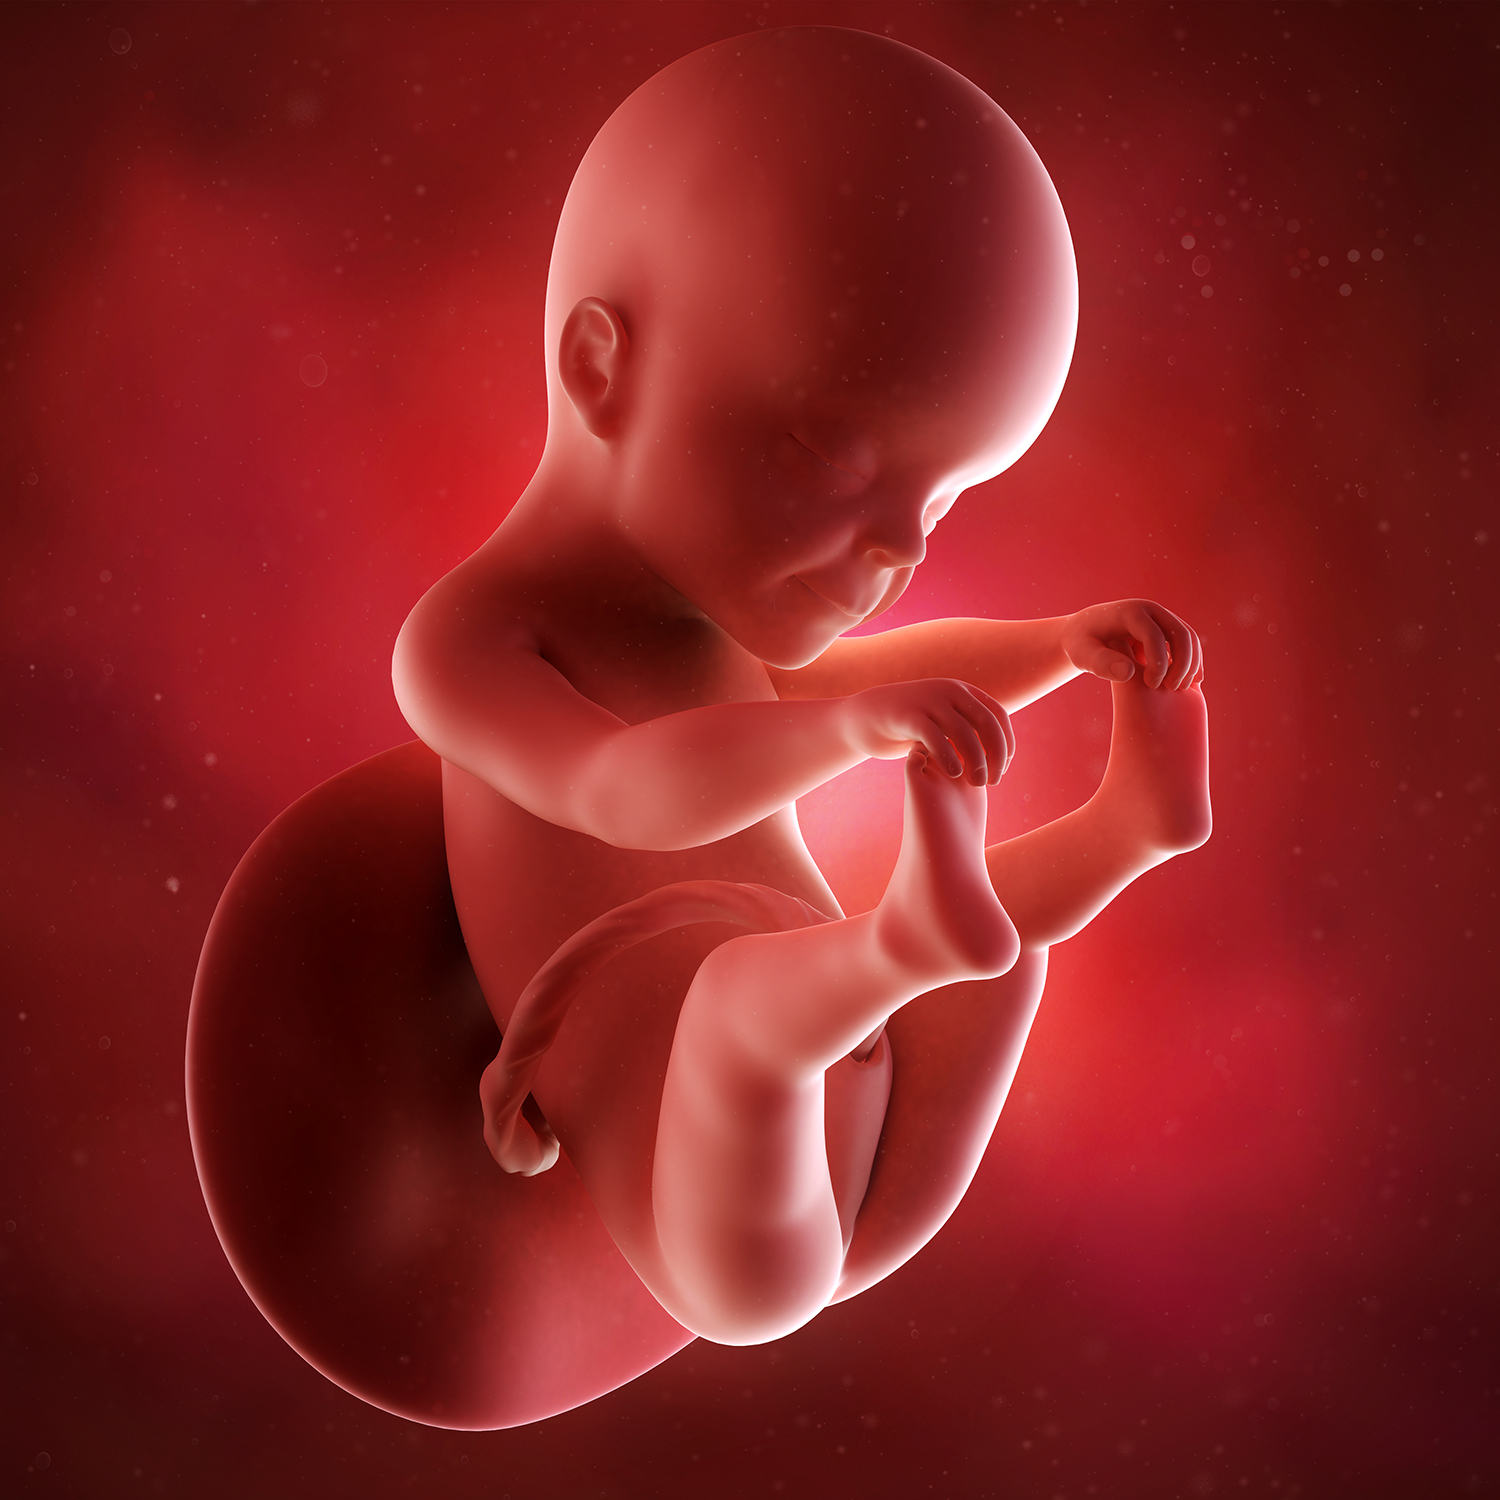 How Developed Is A Baby At 25 Weeks?